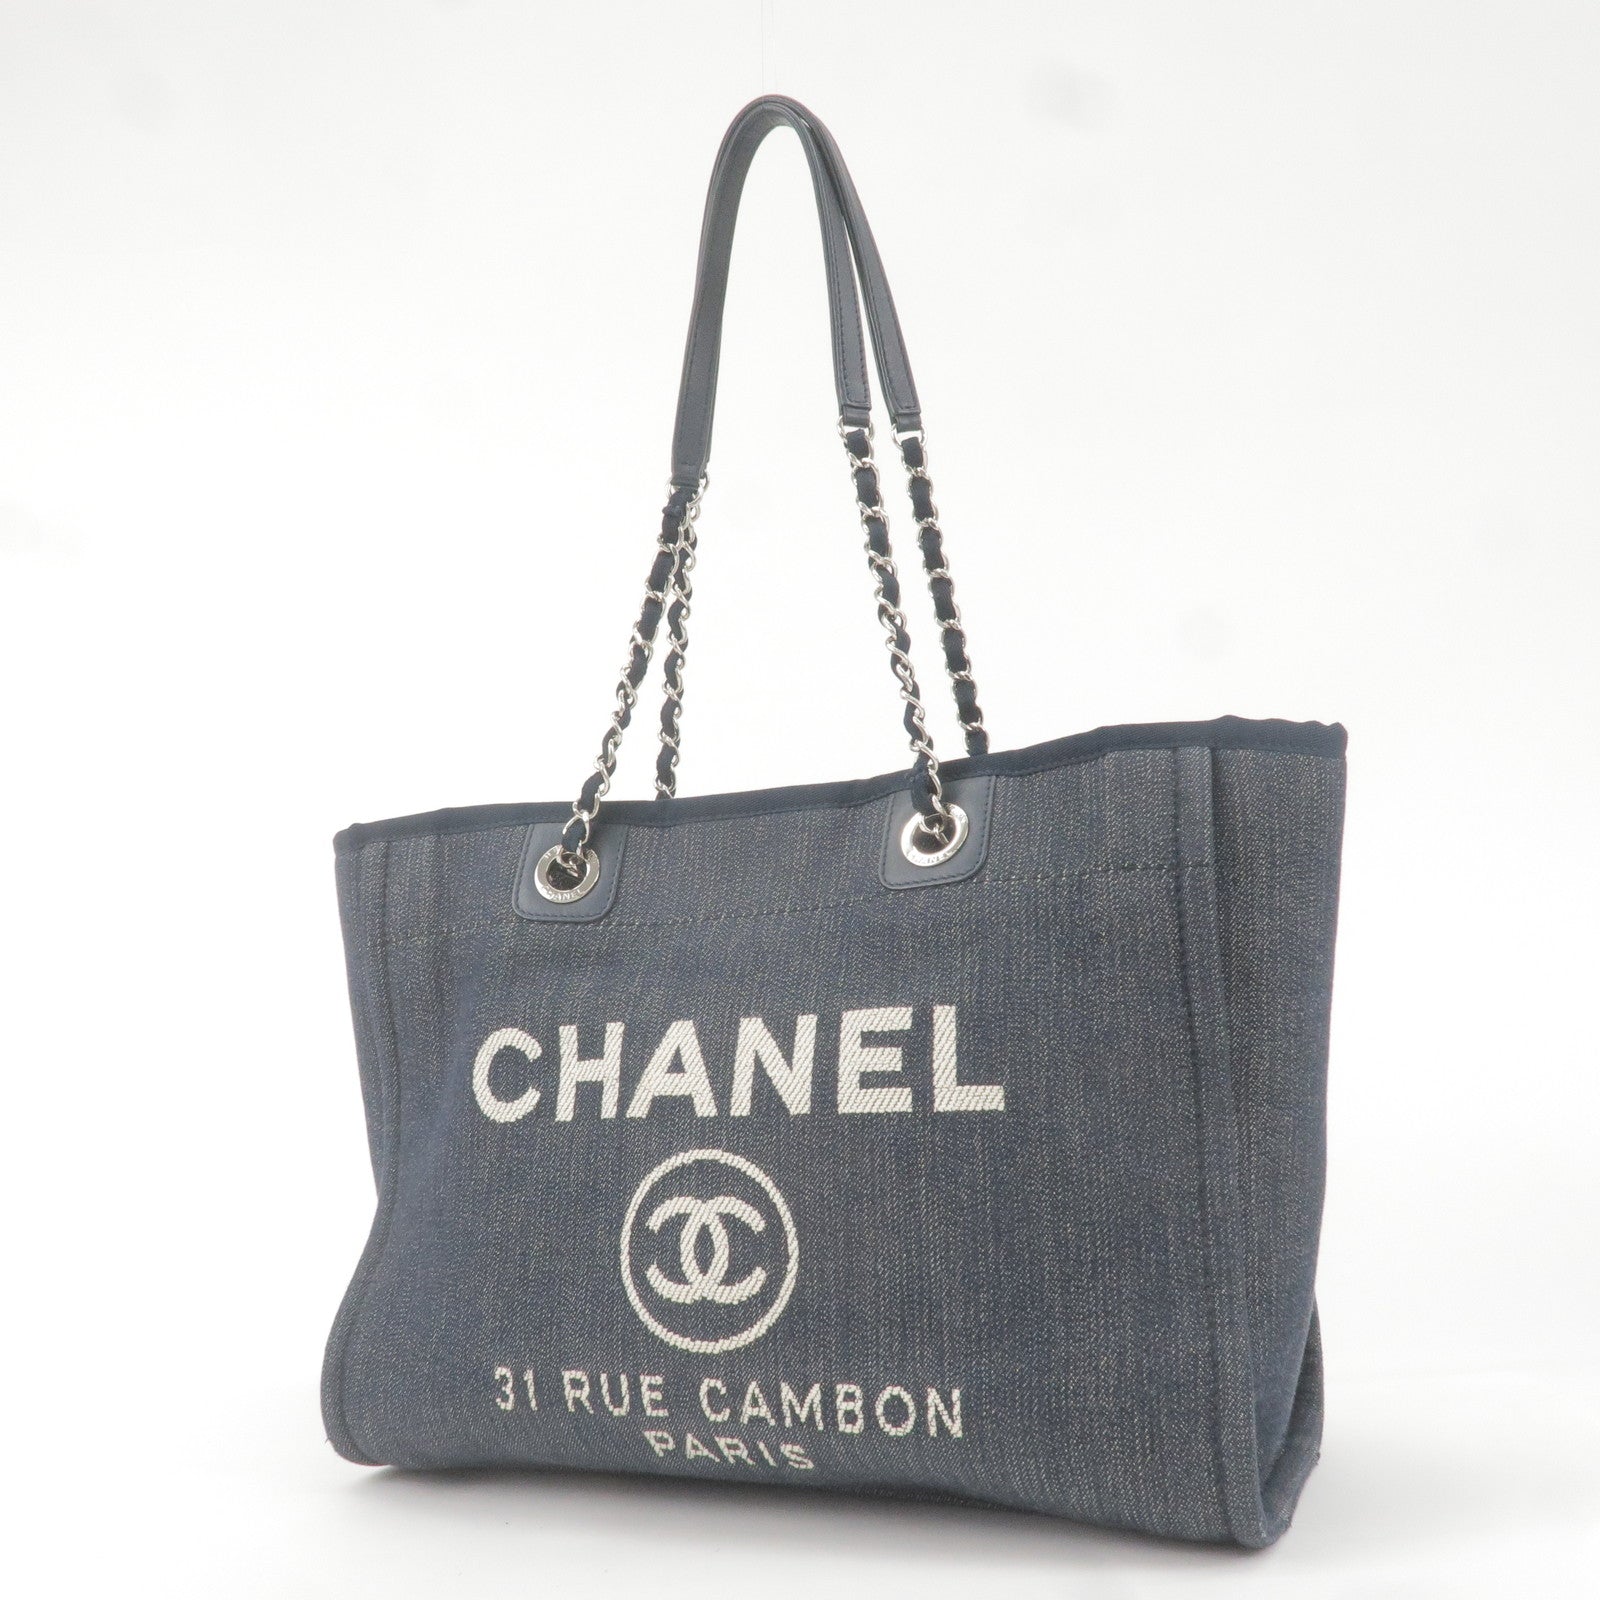 Denim - Bag - Navy - Chain - A67001 – dct - Leather - Deauville -  ep_vintage luxury Store - Tote - CHANEL - MM - Borsa a tracolla Chanel  Vintage in raso nero